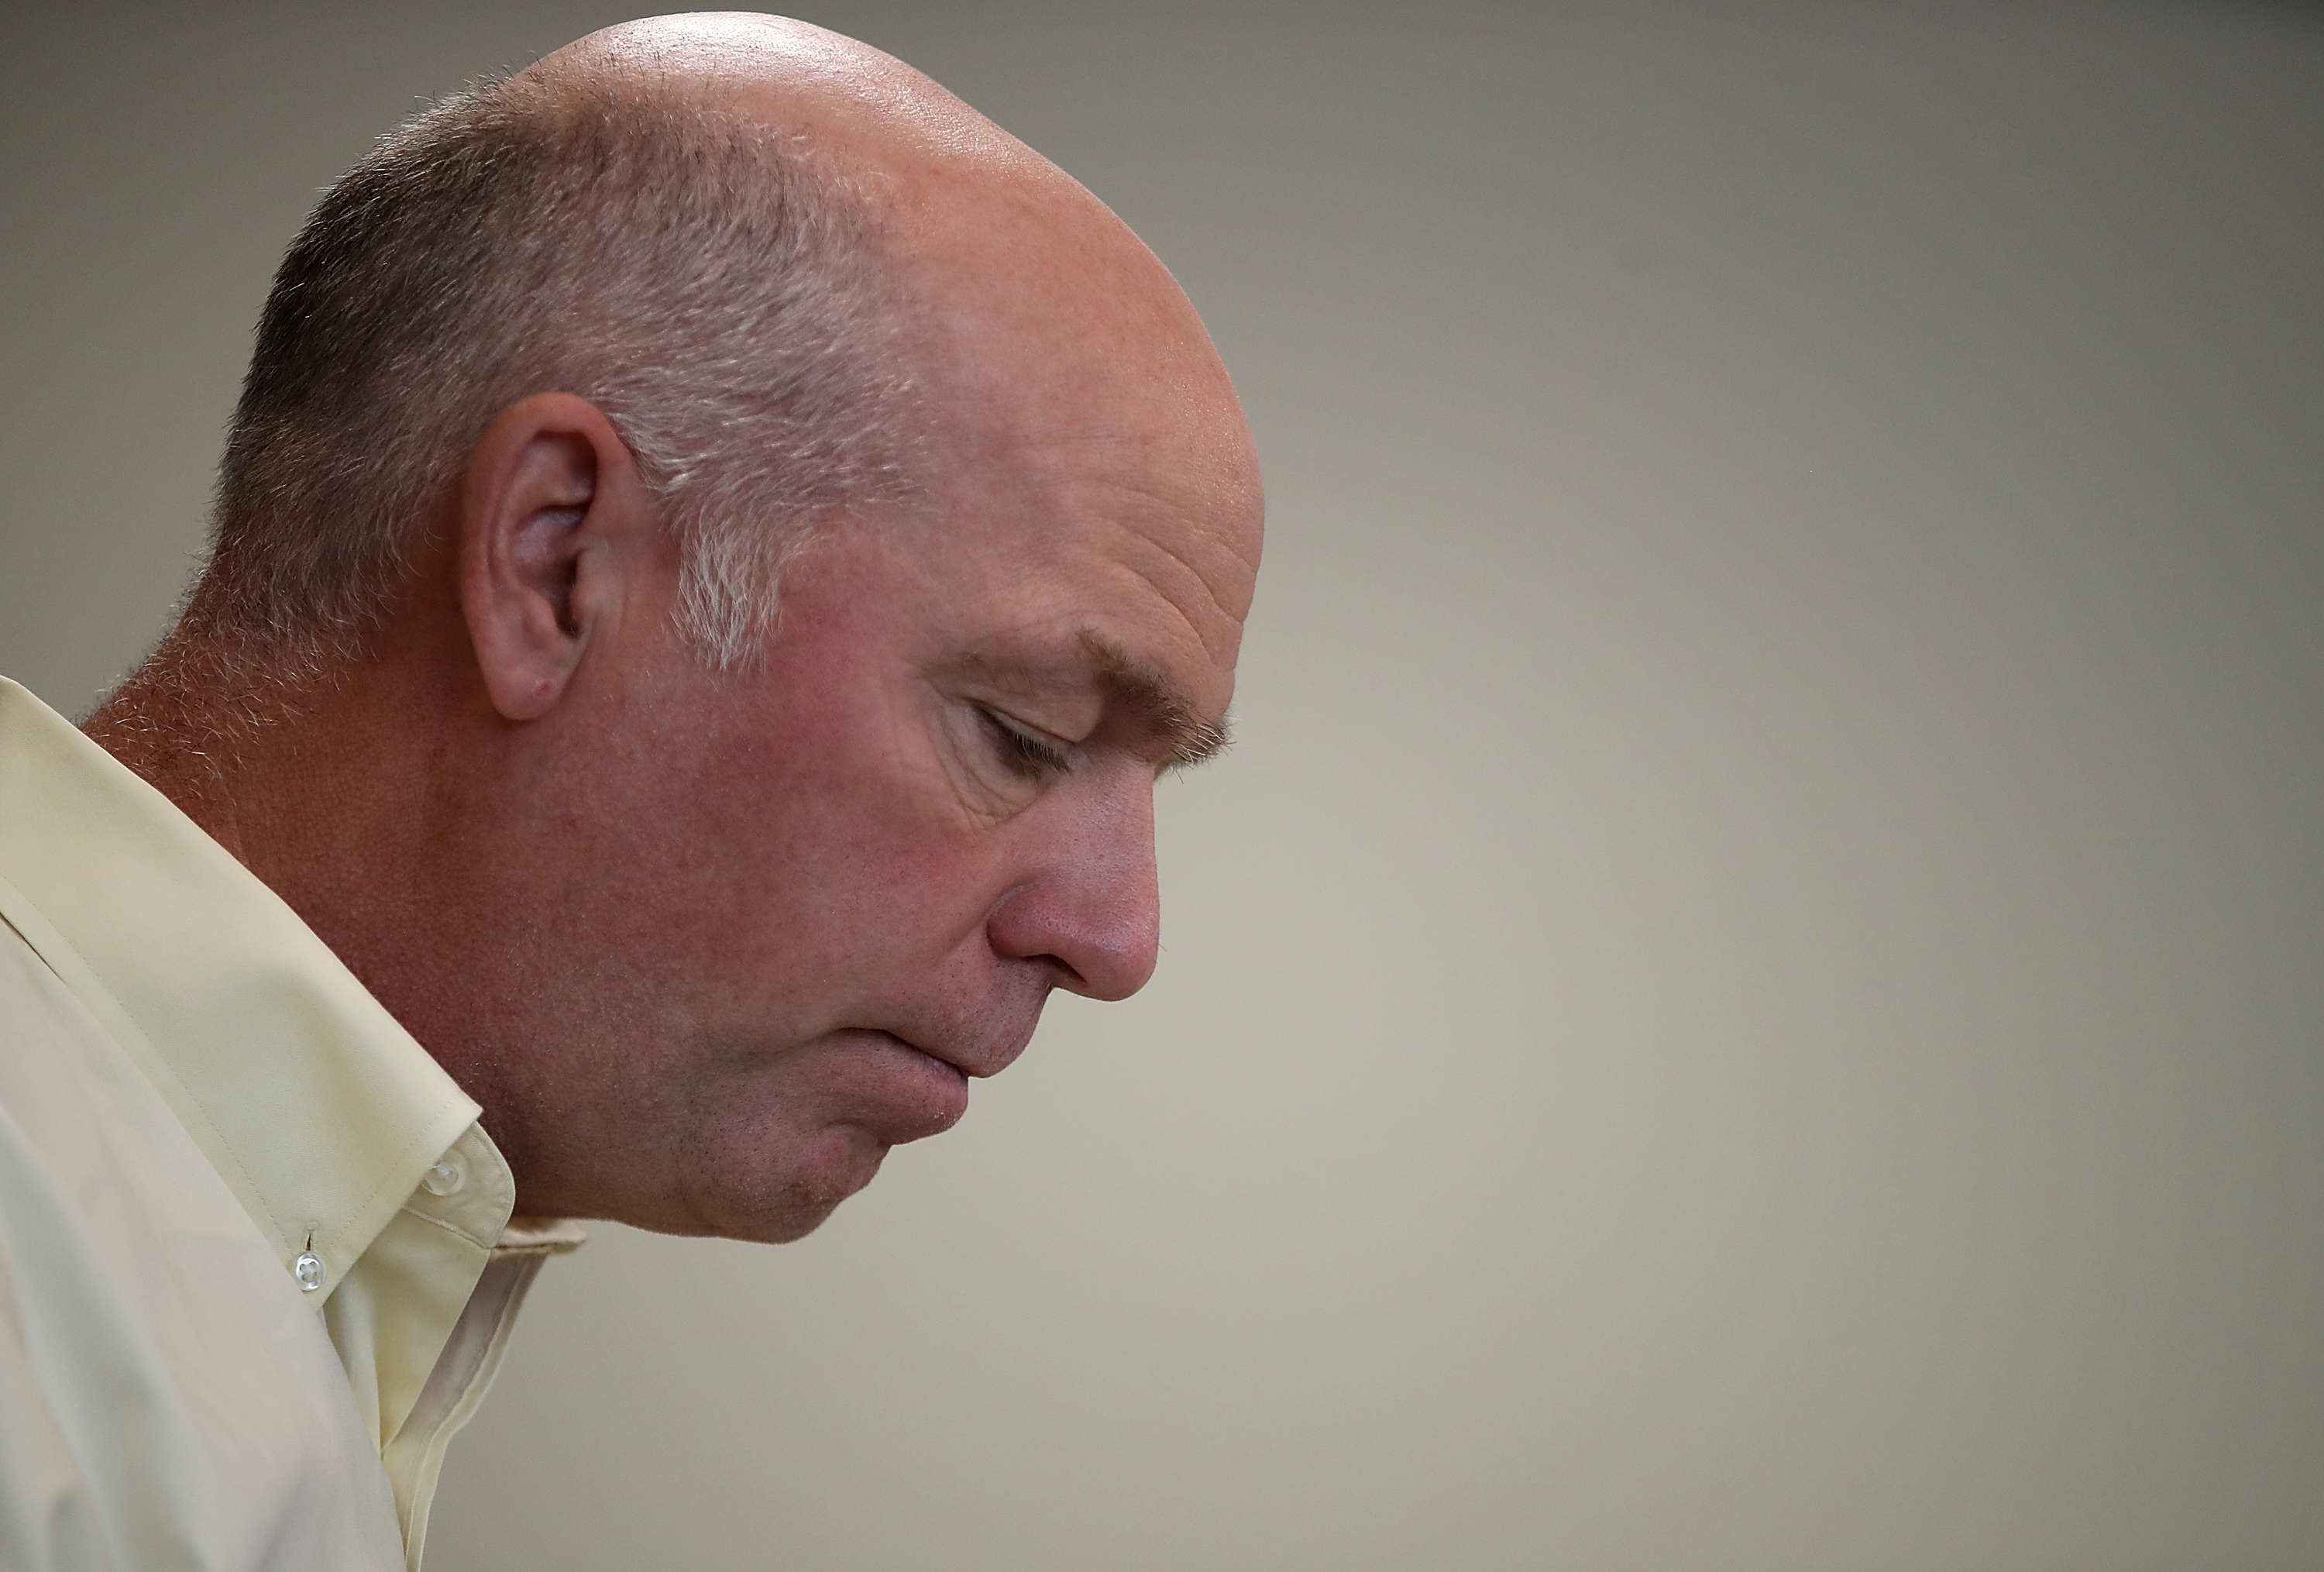 Republican Congressional candidate Greg Gianforte looks on during a campaign meet and greet at Lambros Real Estate on May 24, 2017 in Missoula, Montana. (Justin Sullivan—Getty Images)